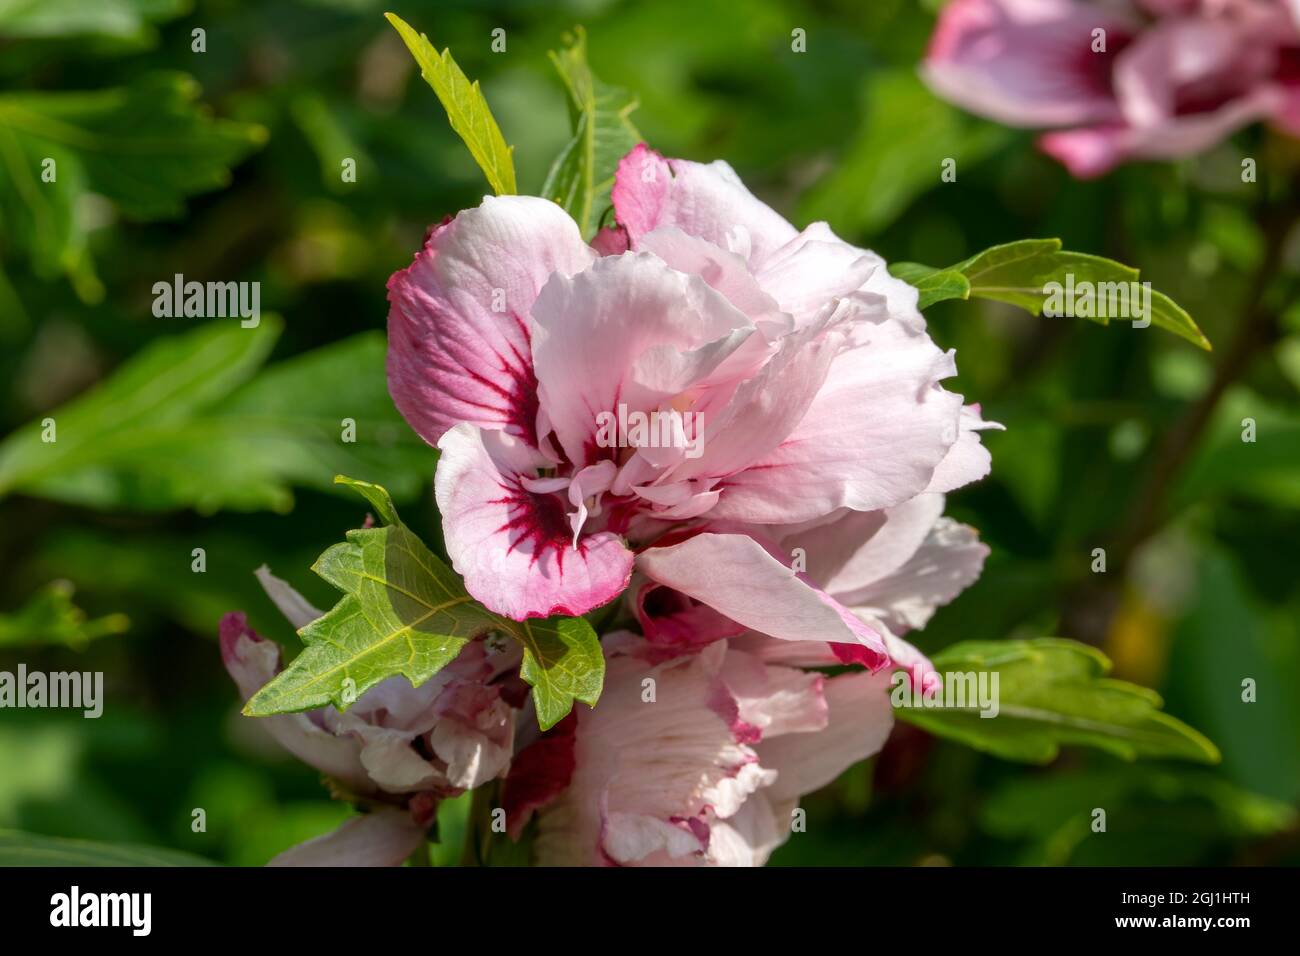 Hibiscus 'Lady Stanley' a summer flowering shrub plant with a pink red summertime flower commonly known as rose of Sharon, stock photo image Stock Photo